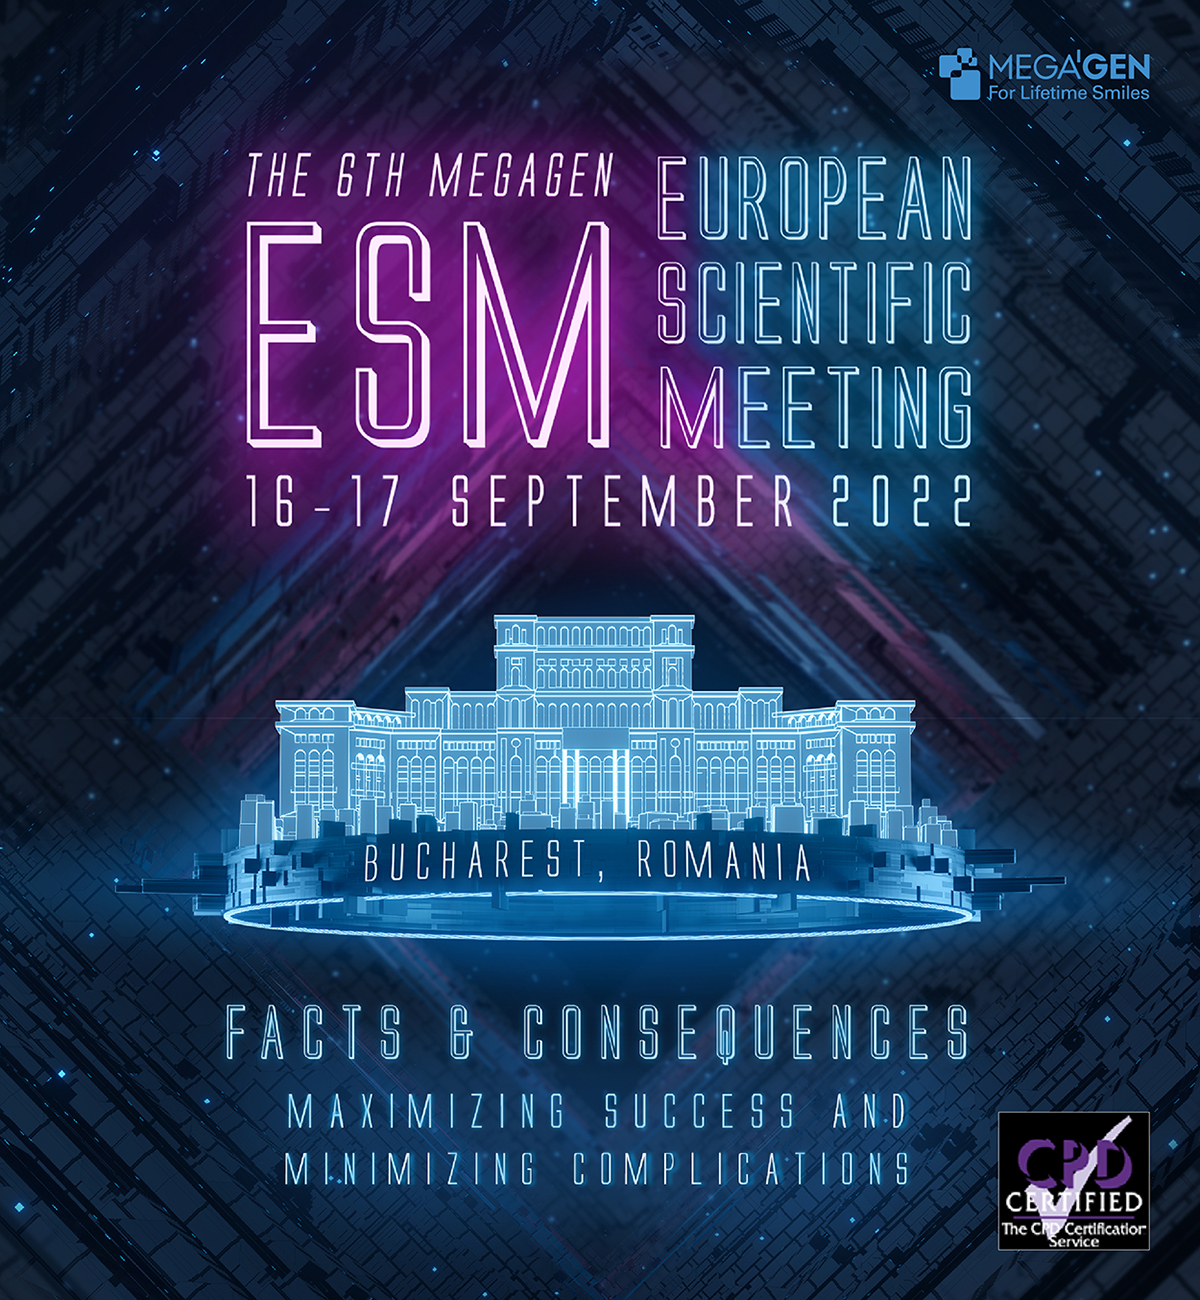 ESM Bucharest 2022 We are excited to welcome you to the 6th European Scientific Meeting - ESM - that will take place in Bucharest, Romania, between 16 – 17 September 2022. Returning to Europe, under the theme “FACTS & CONSEQUENCES - maximizing success and minimizing complications”, the long-awaited MegaGen congress includes an exhibition area and a dynamic mix of lecture and workshop sessions, as well as an exclusive dinner and a breathtaking clubbing experience at Face Club.